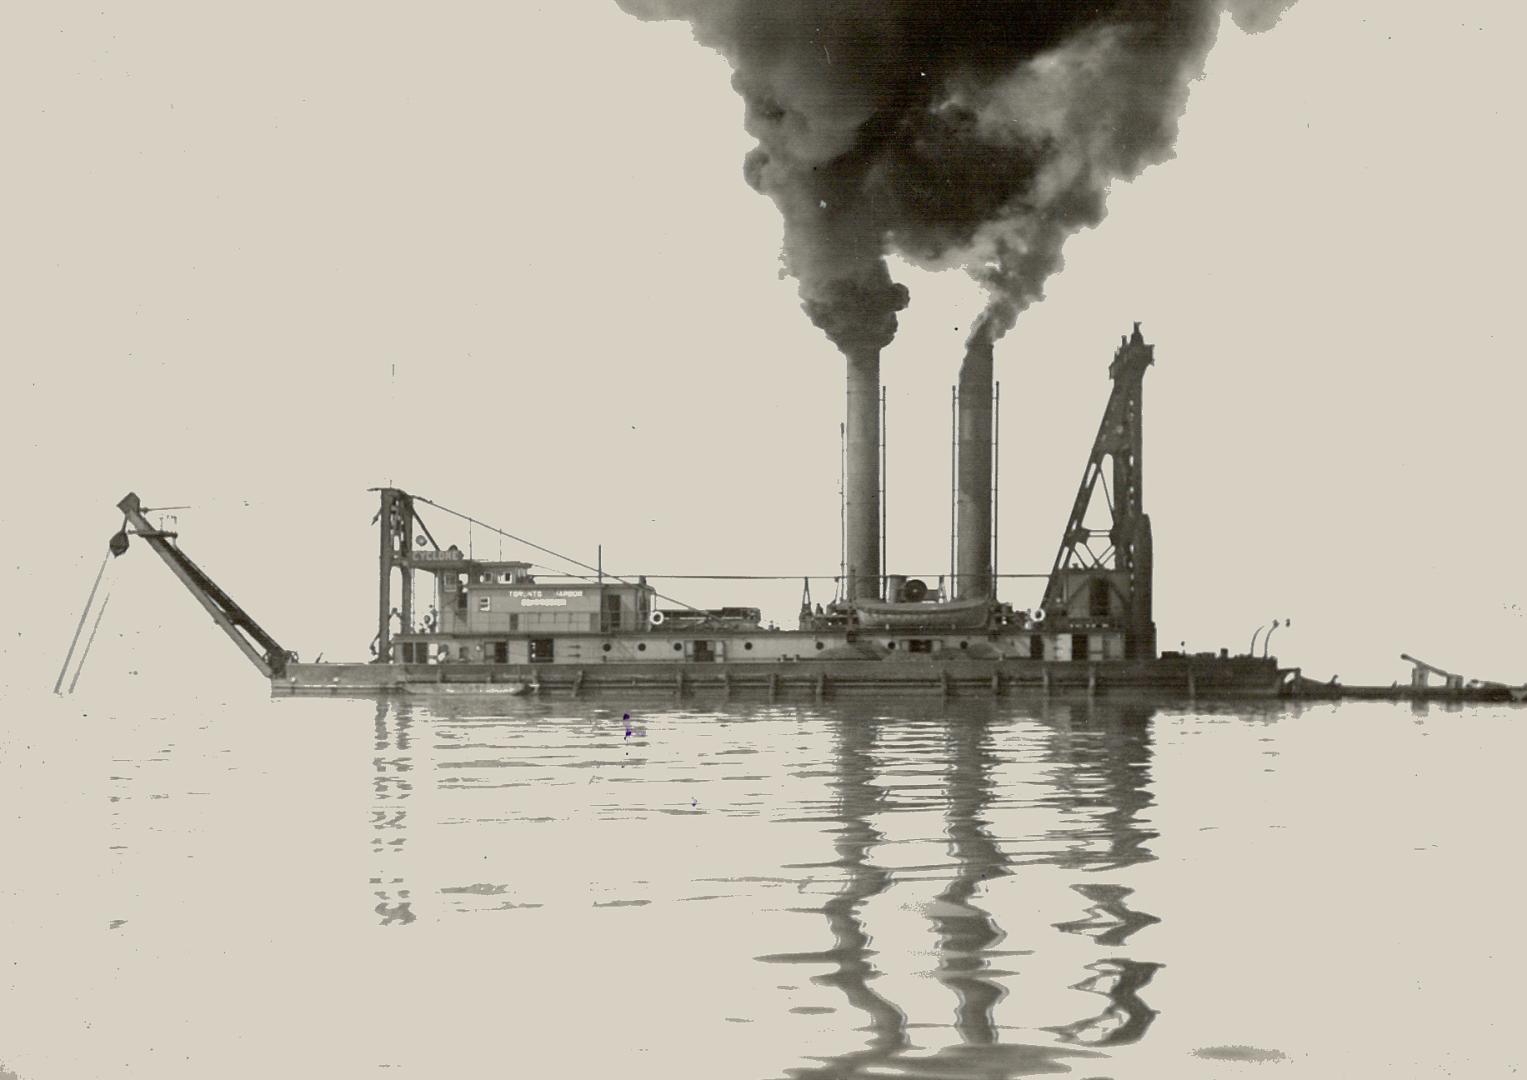 Image shows a pump dredge boat on the lake.